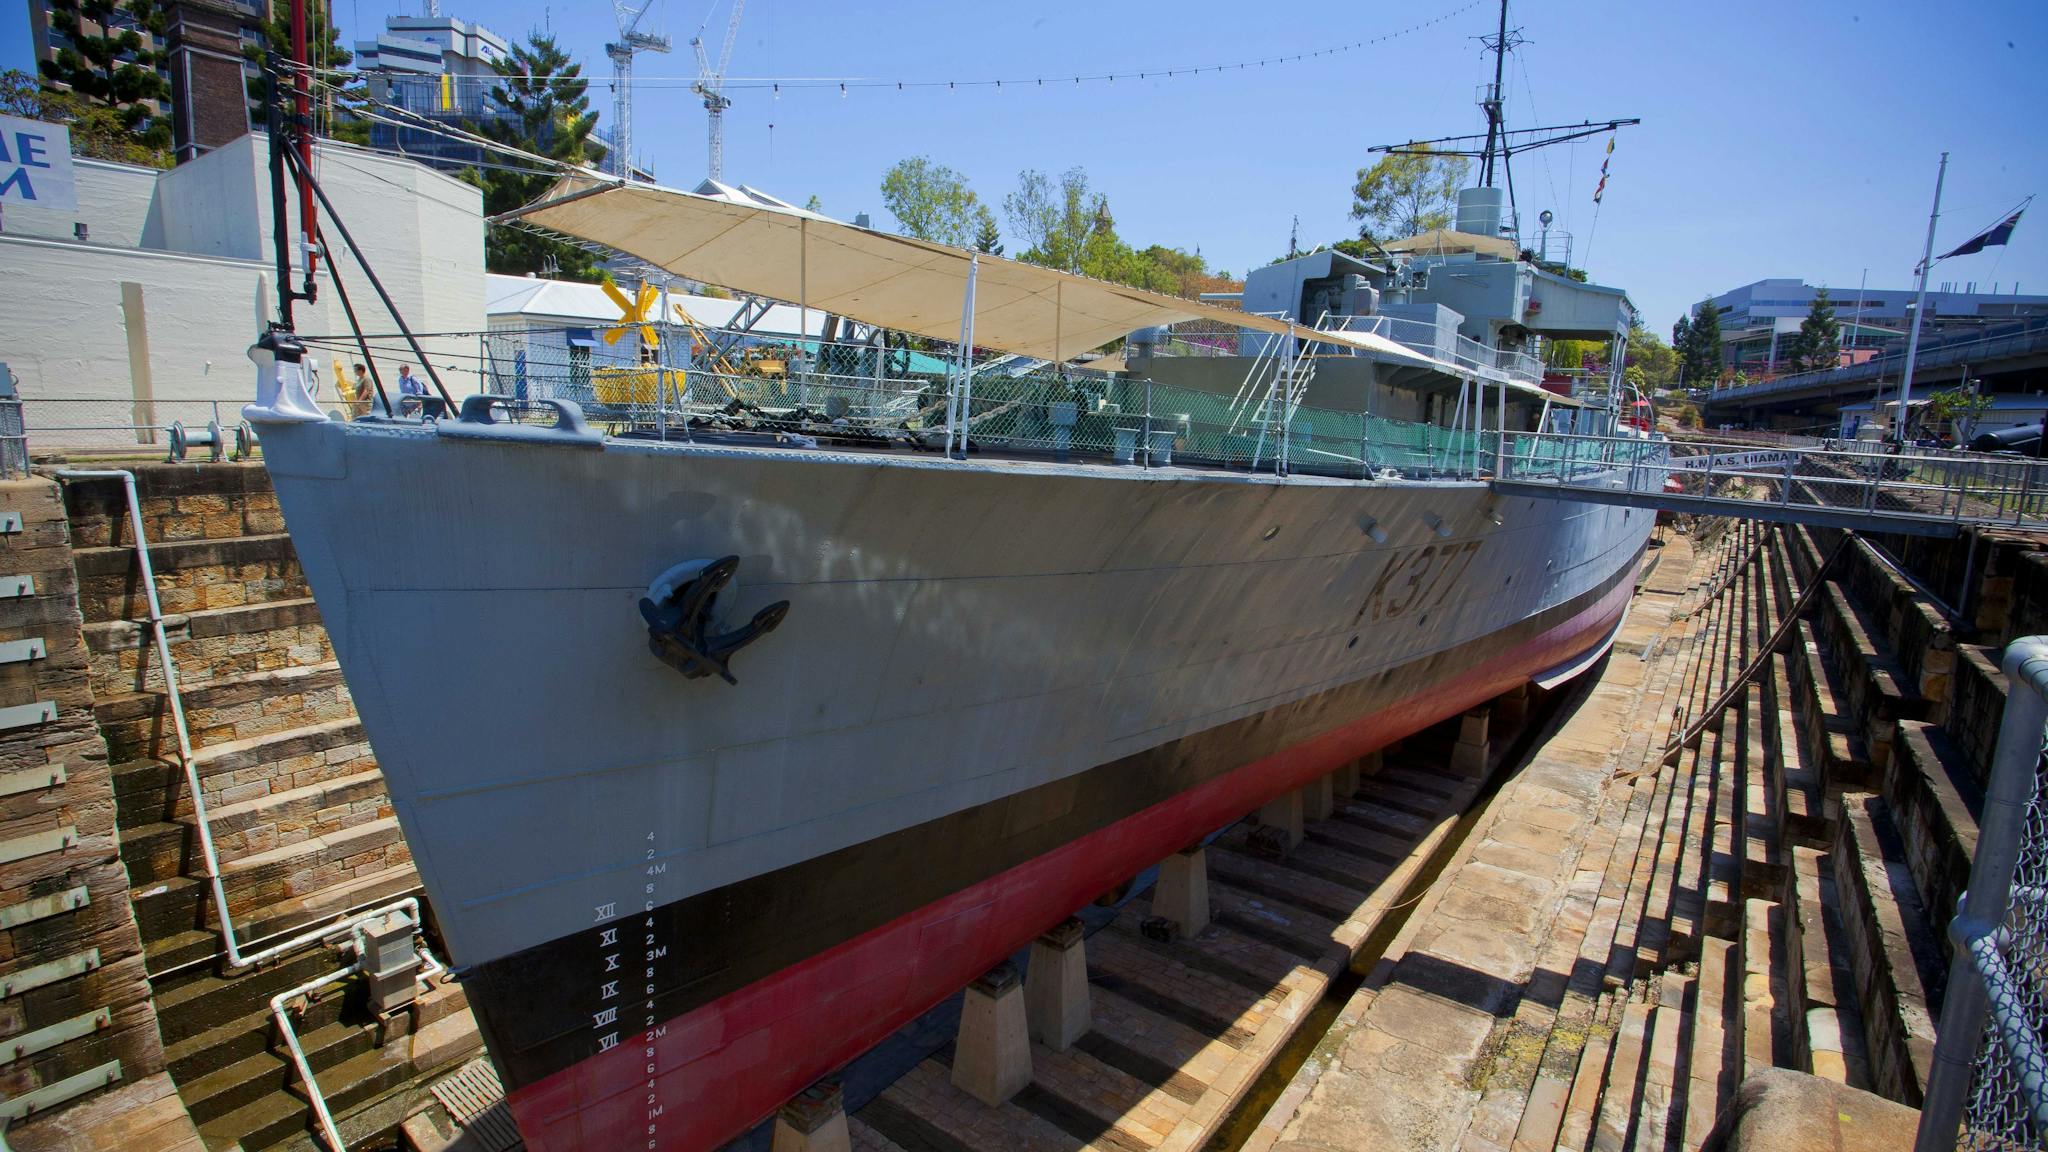 WW2 frigate ex-HMAS Diamantina berthed in the heritage listed South Brisbane Dry Dock